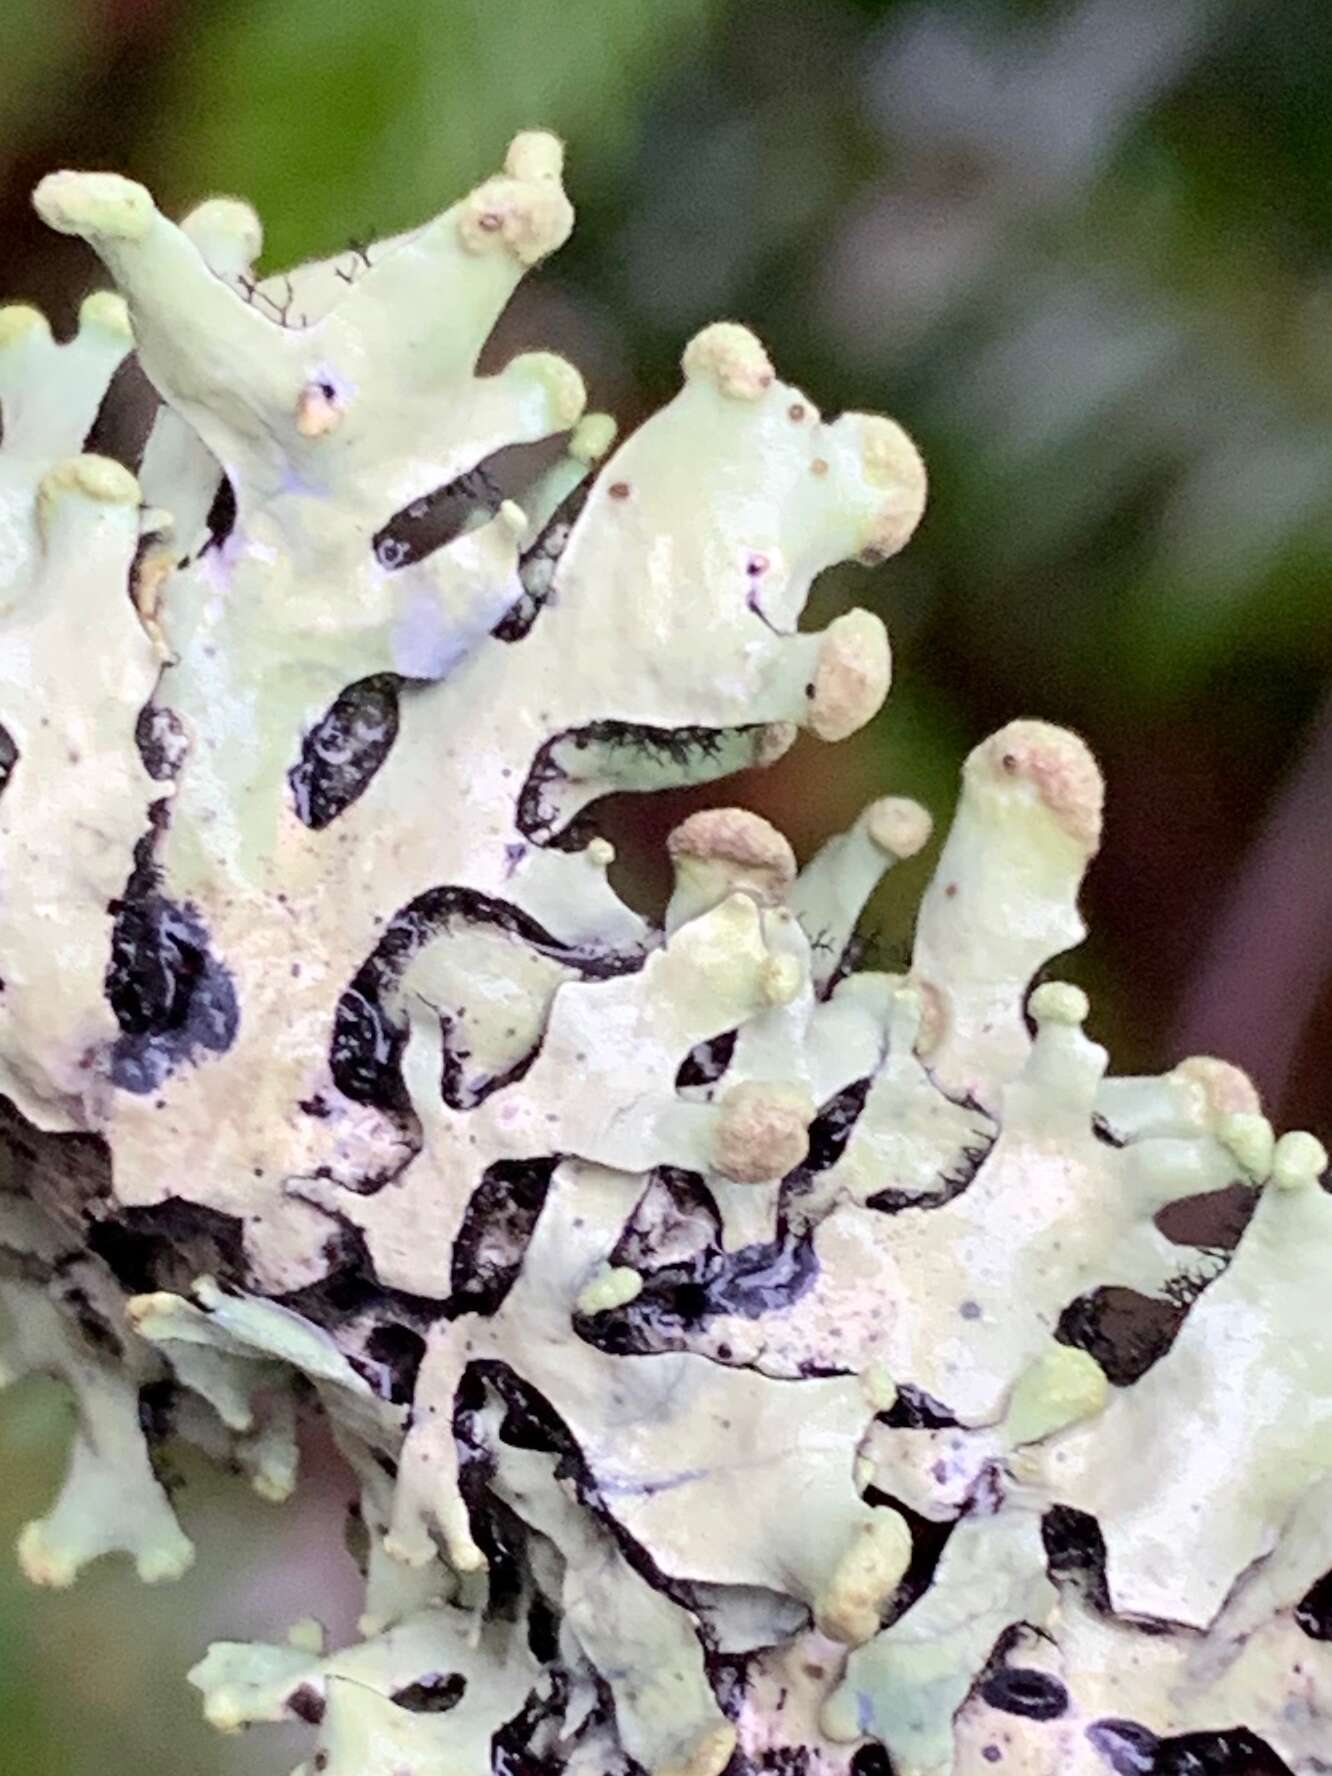 Image of sinuous hypotrachyna lichen